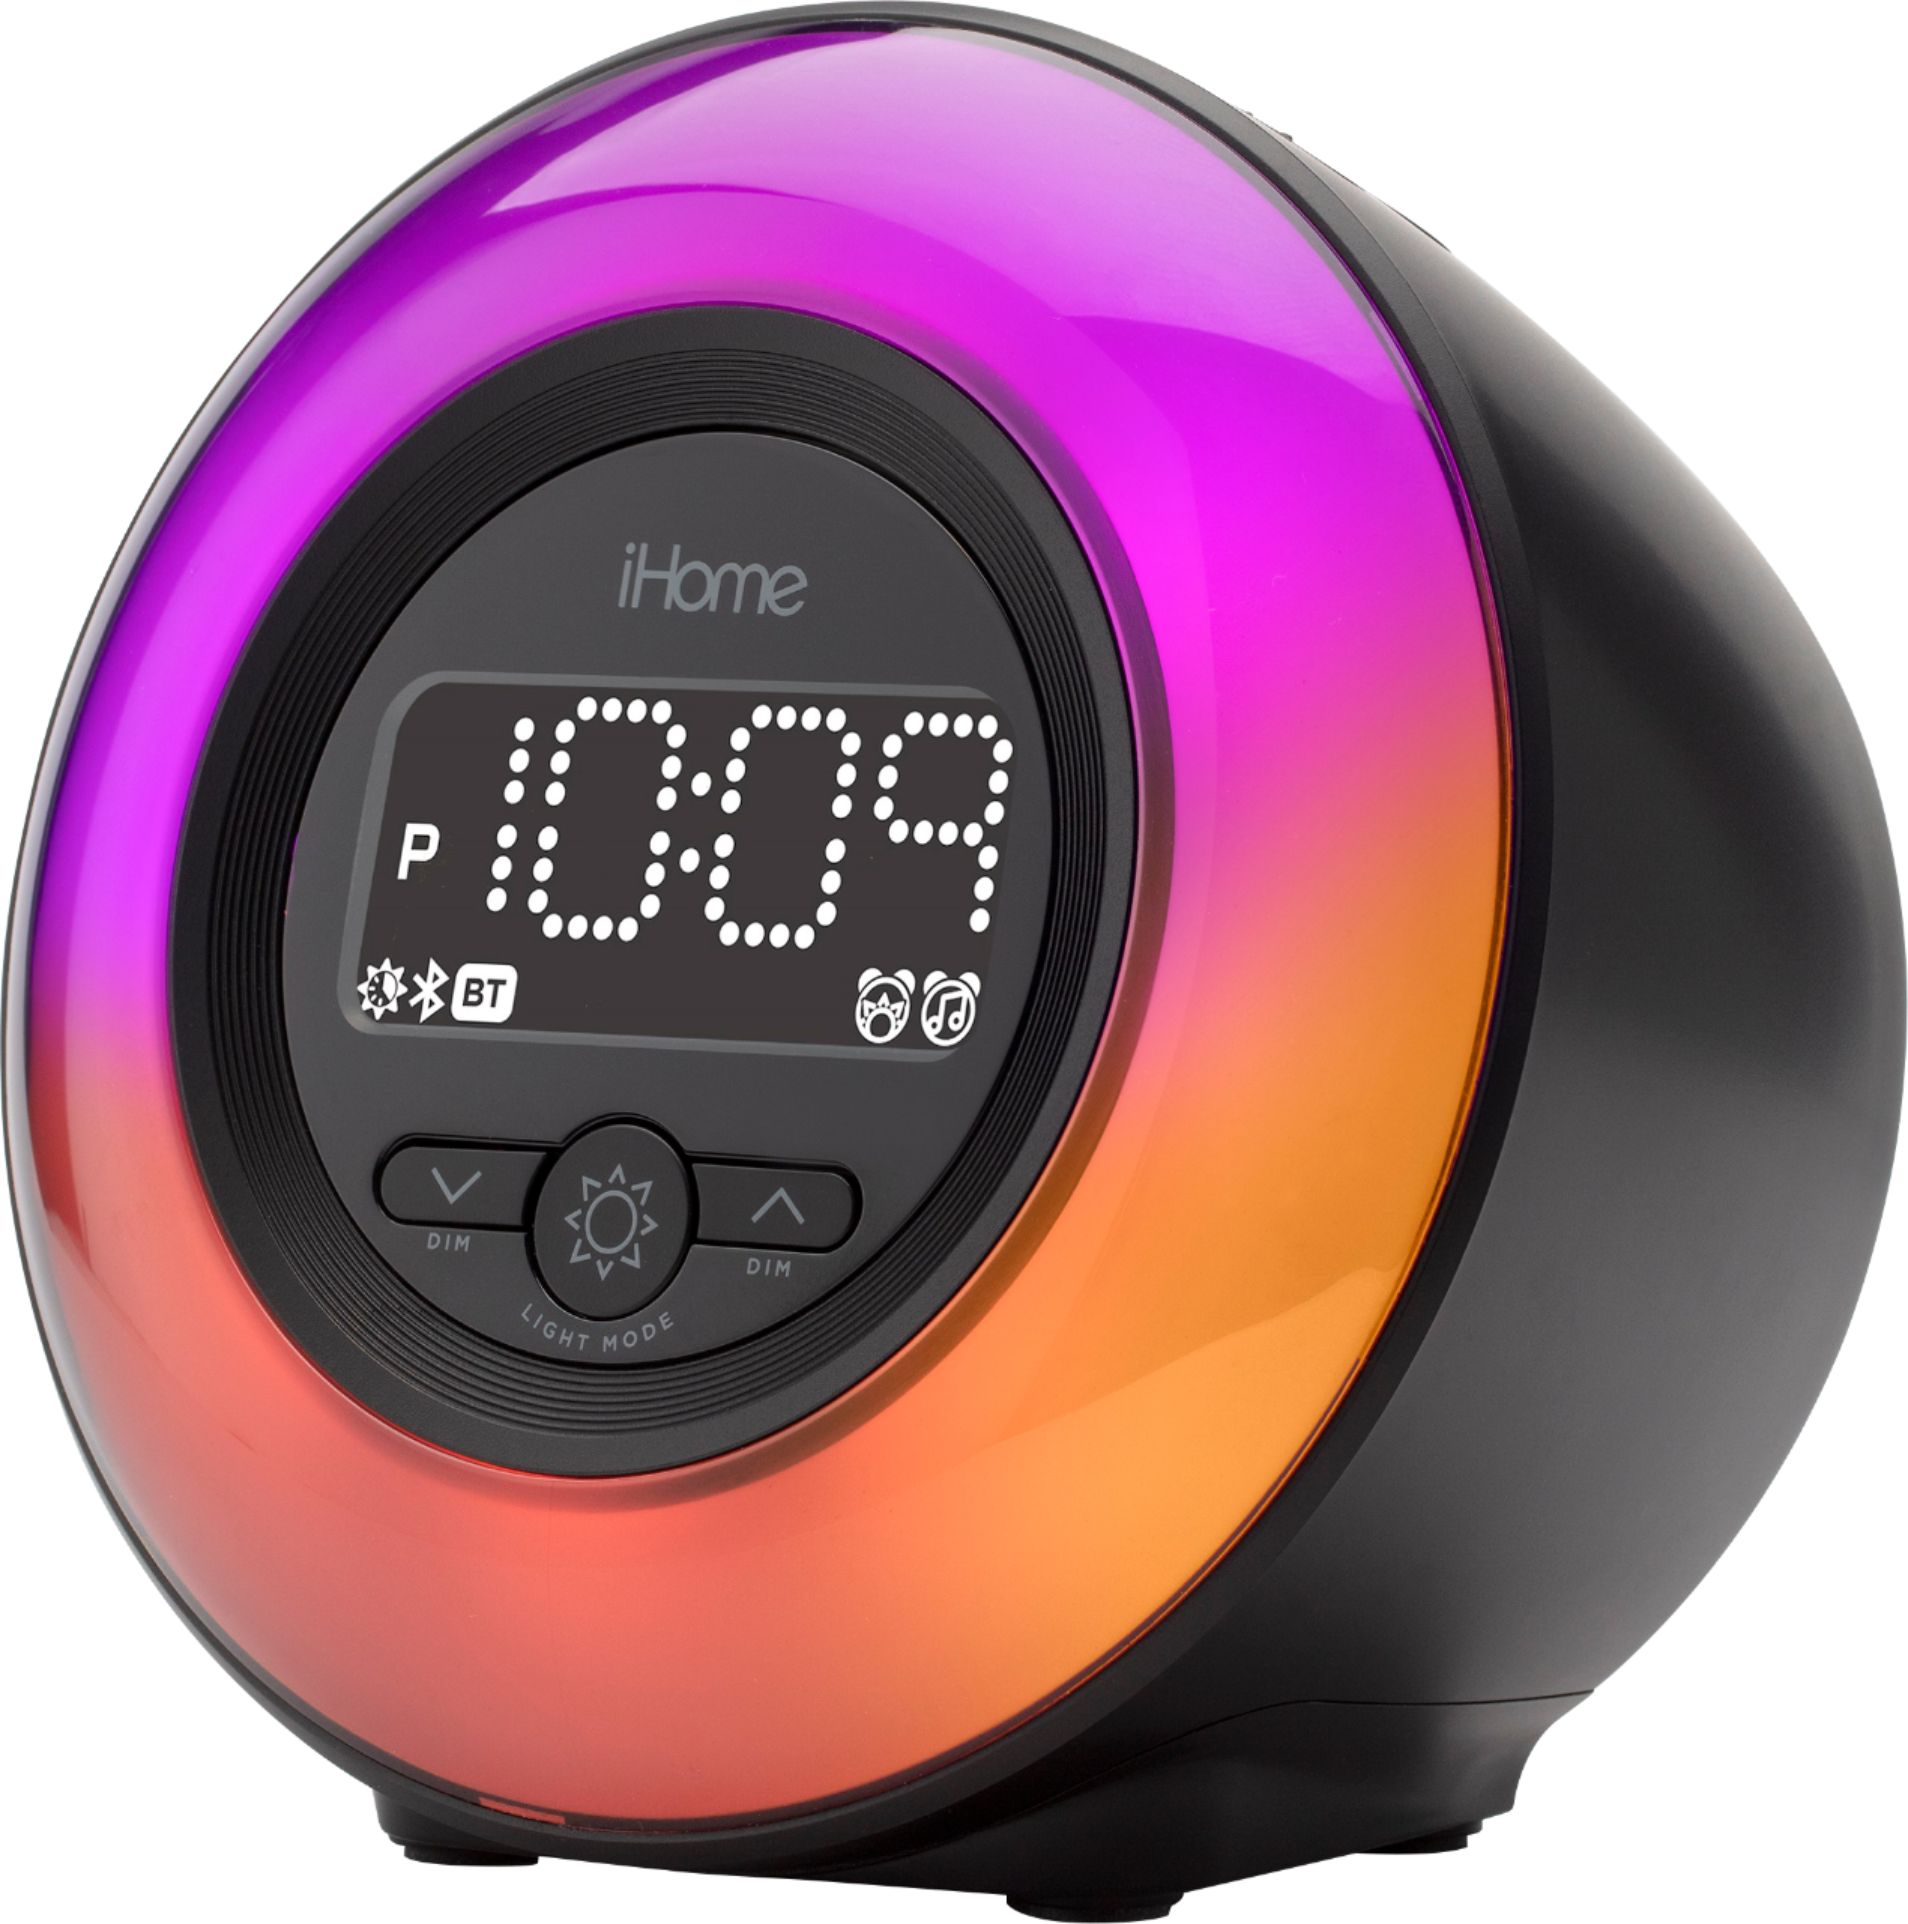 Angle View: iHome - PowerClock - Bluetooth Alarm Clock with Dual USB Charging and Ambient Light